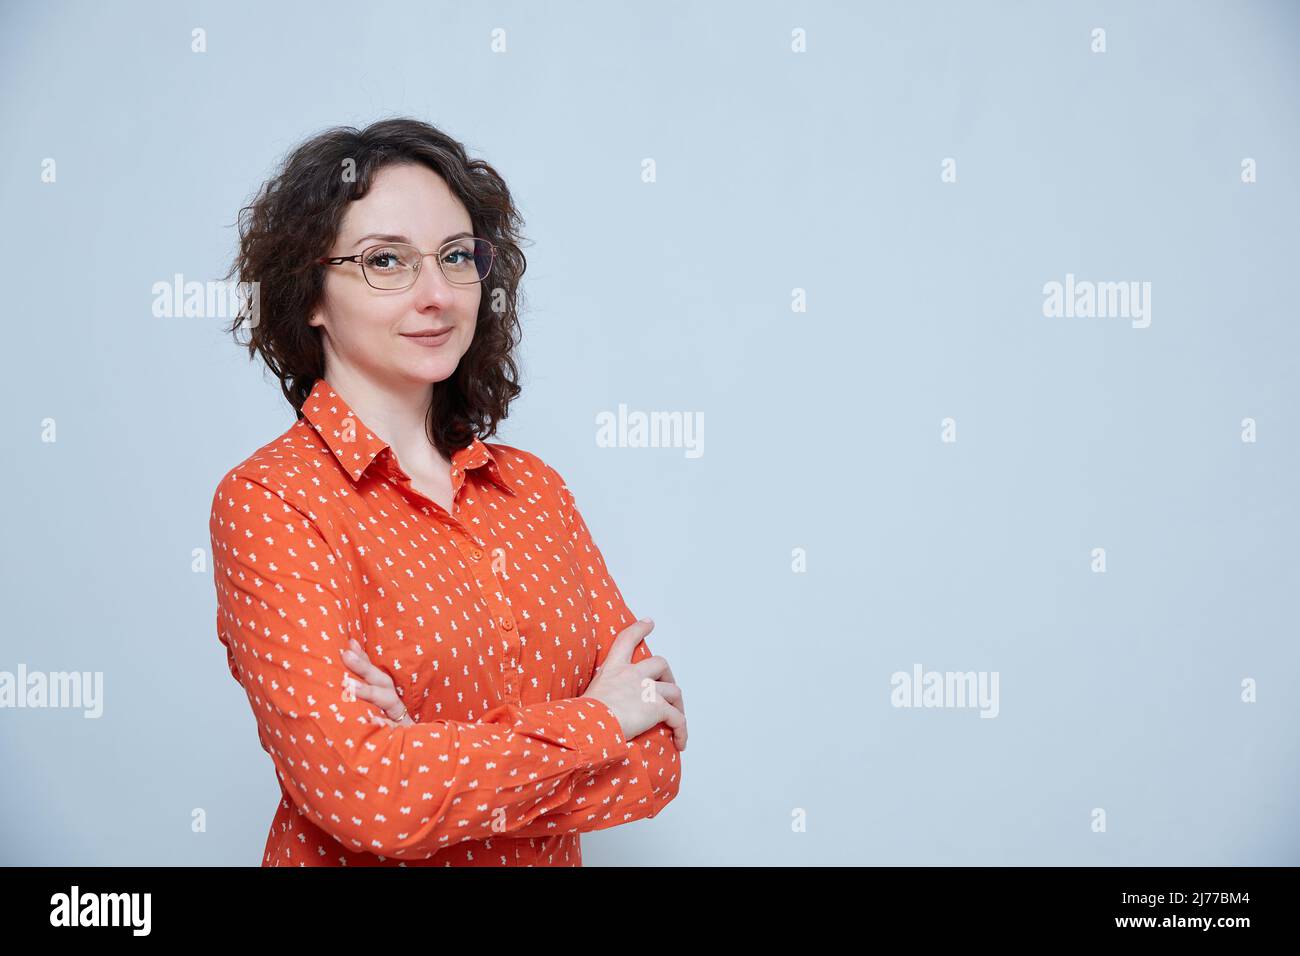 A brunette woman  on a background with a copy space Stock Photo